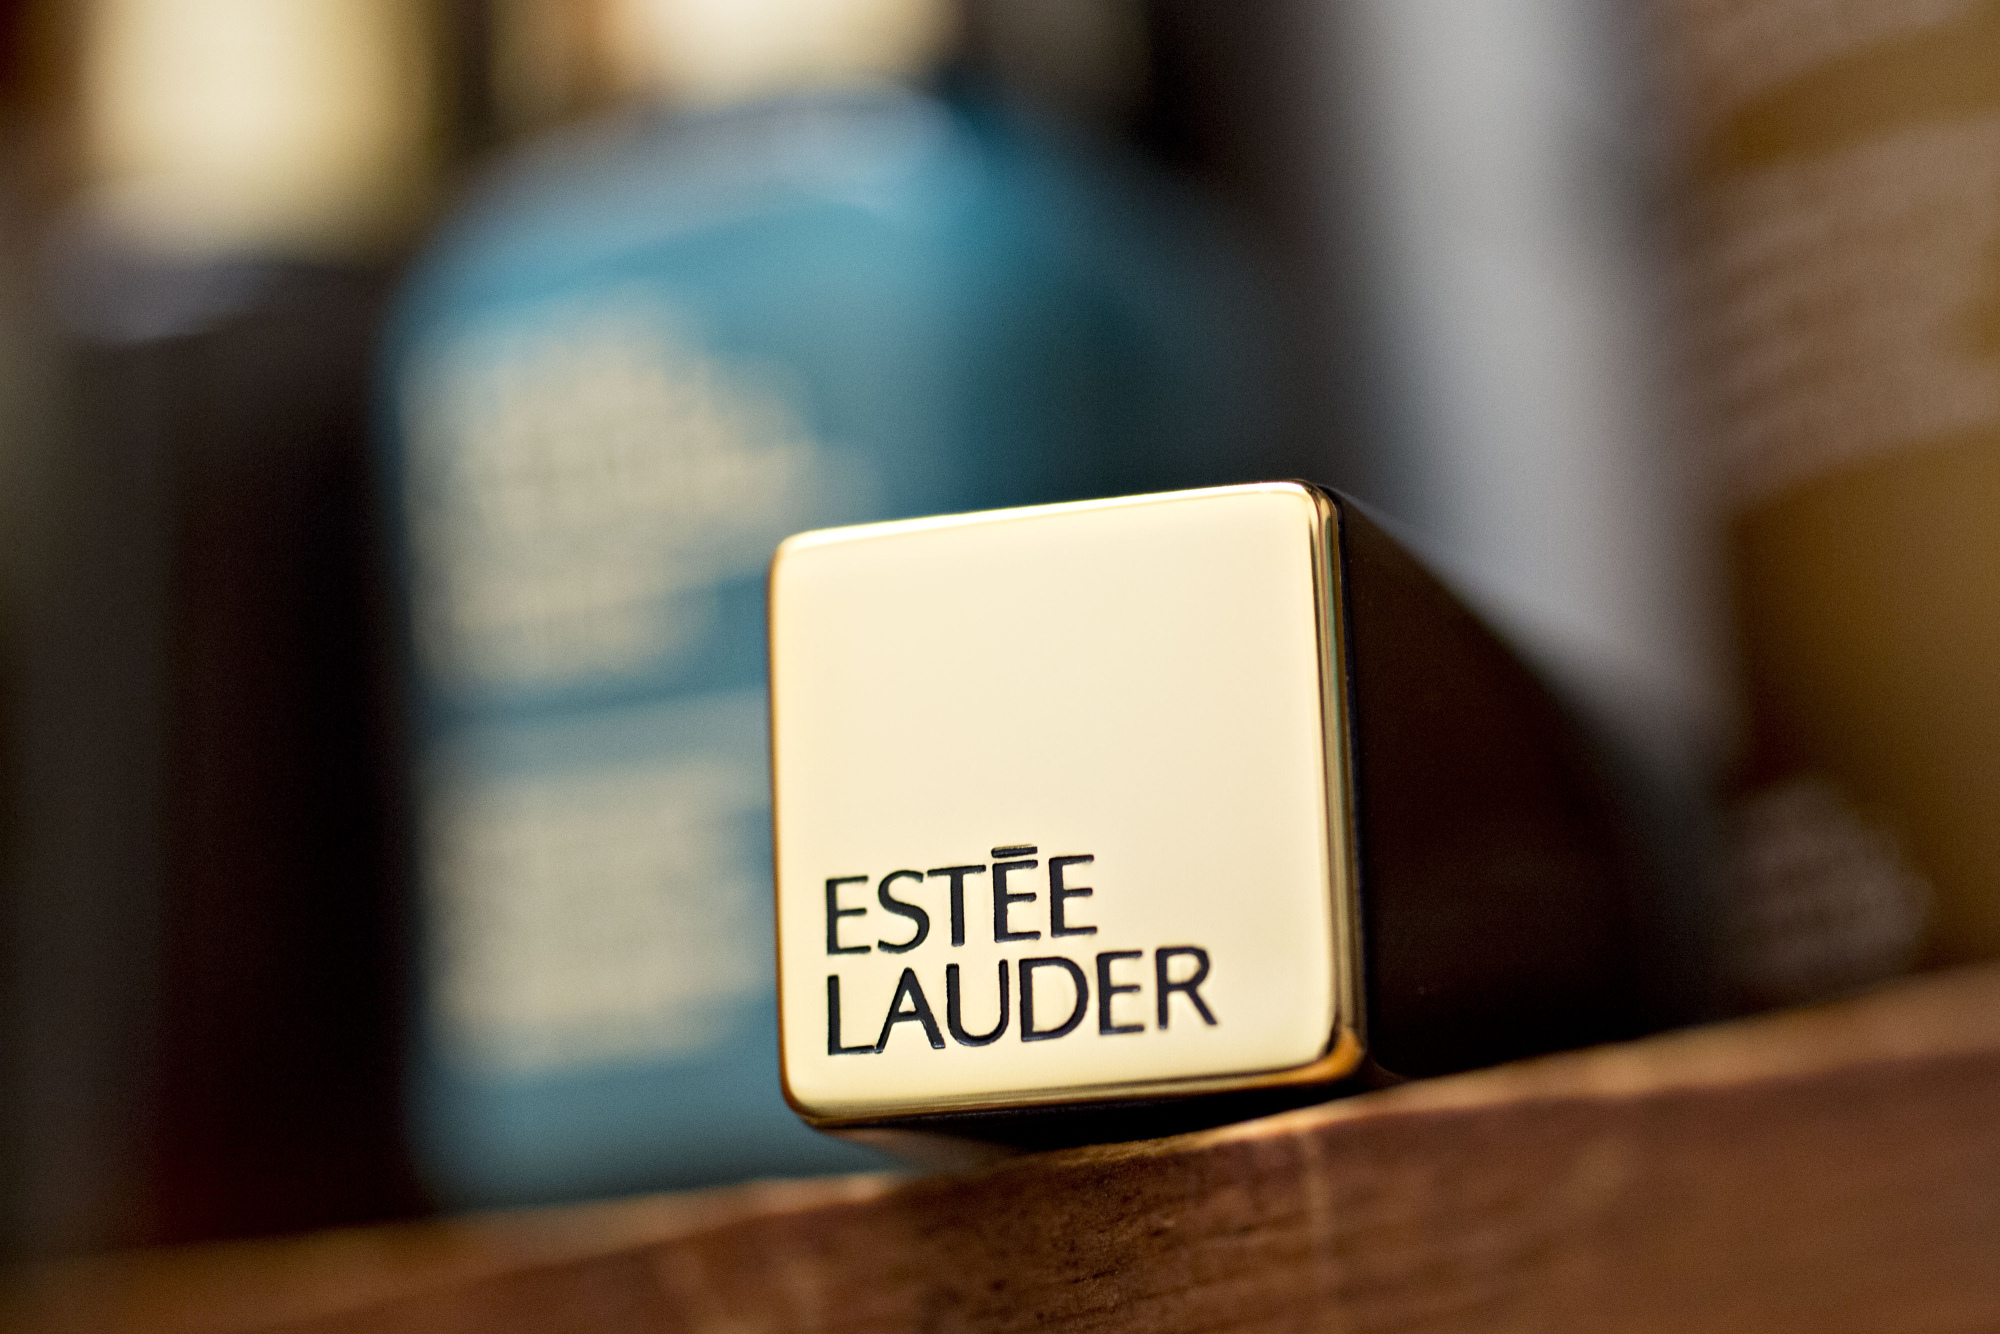 Behind the scenes look at the Estee Lauder Ultimate Red photo